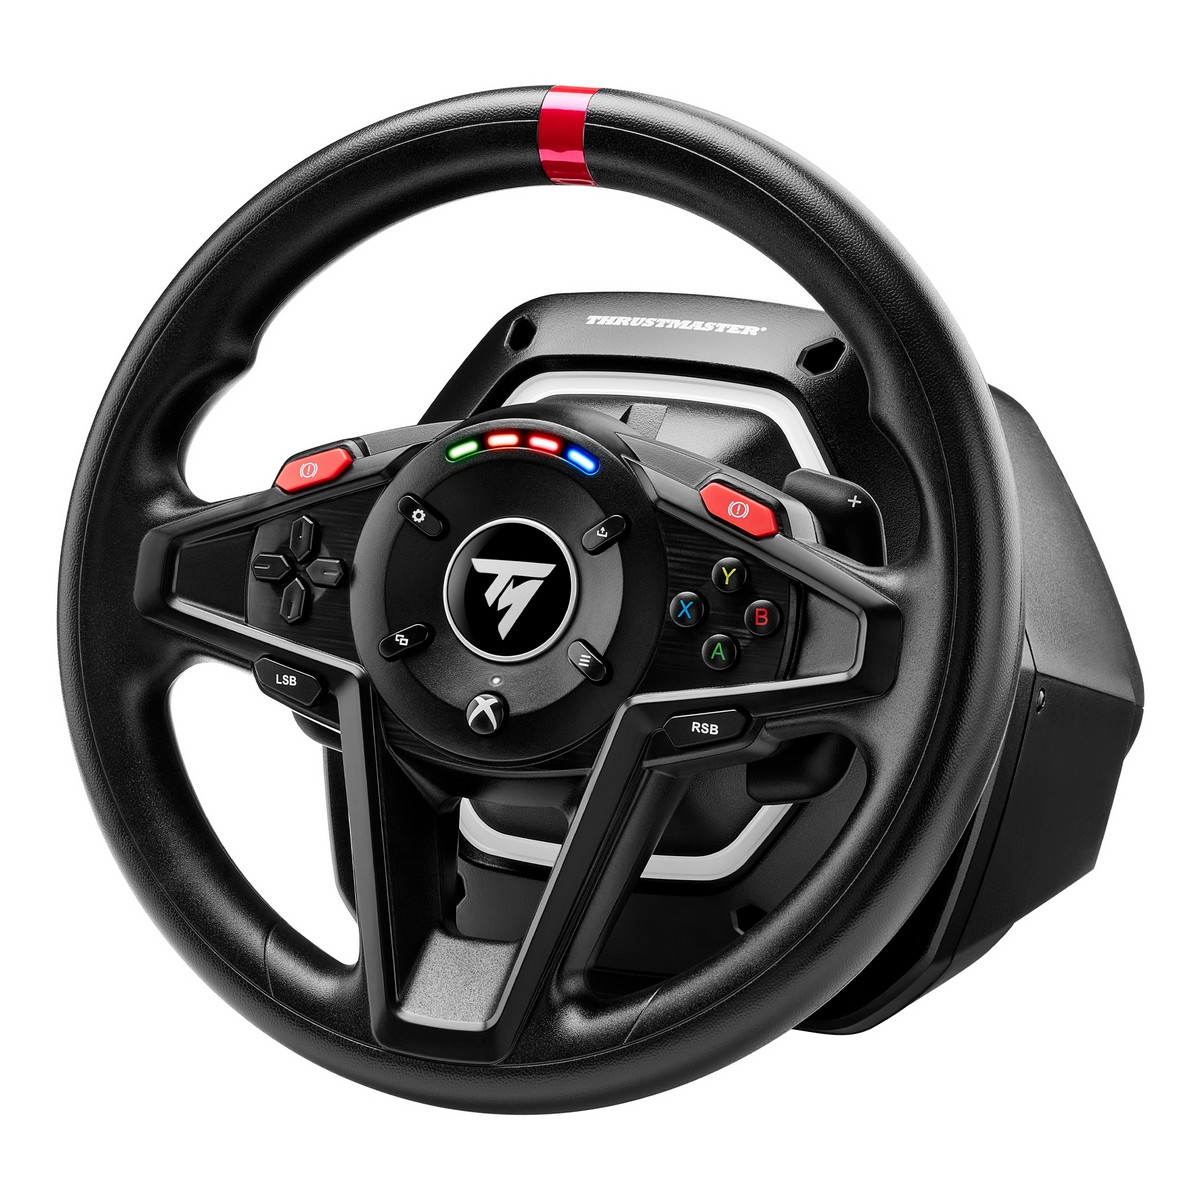  - Thrustmaster T-128 Xbox Series X/S Steering Wheel and Pedal Set (PC/Xbox, 4468011)